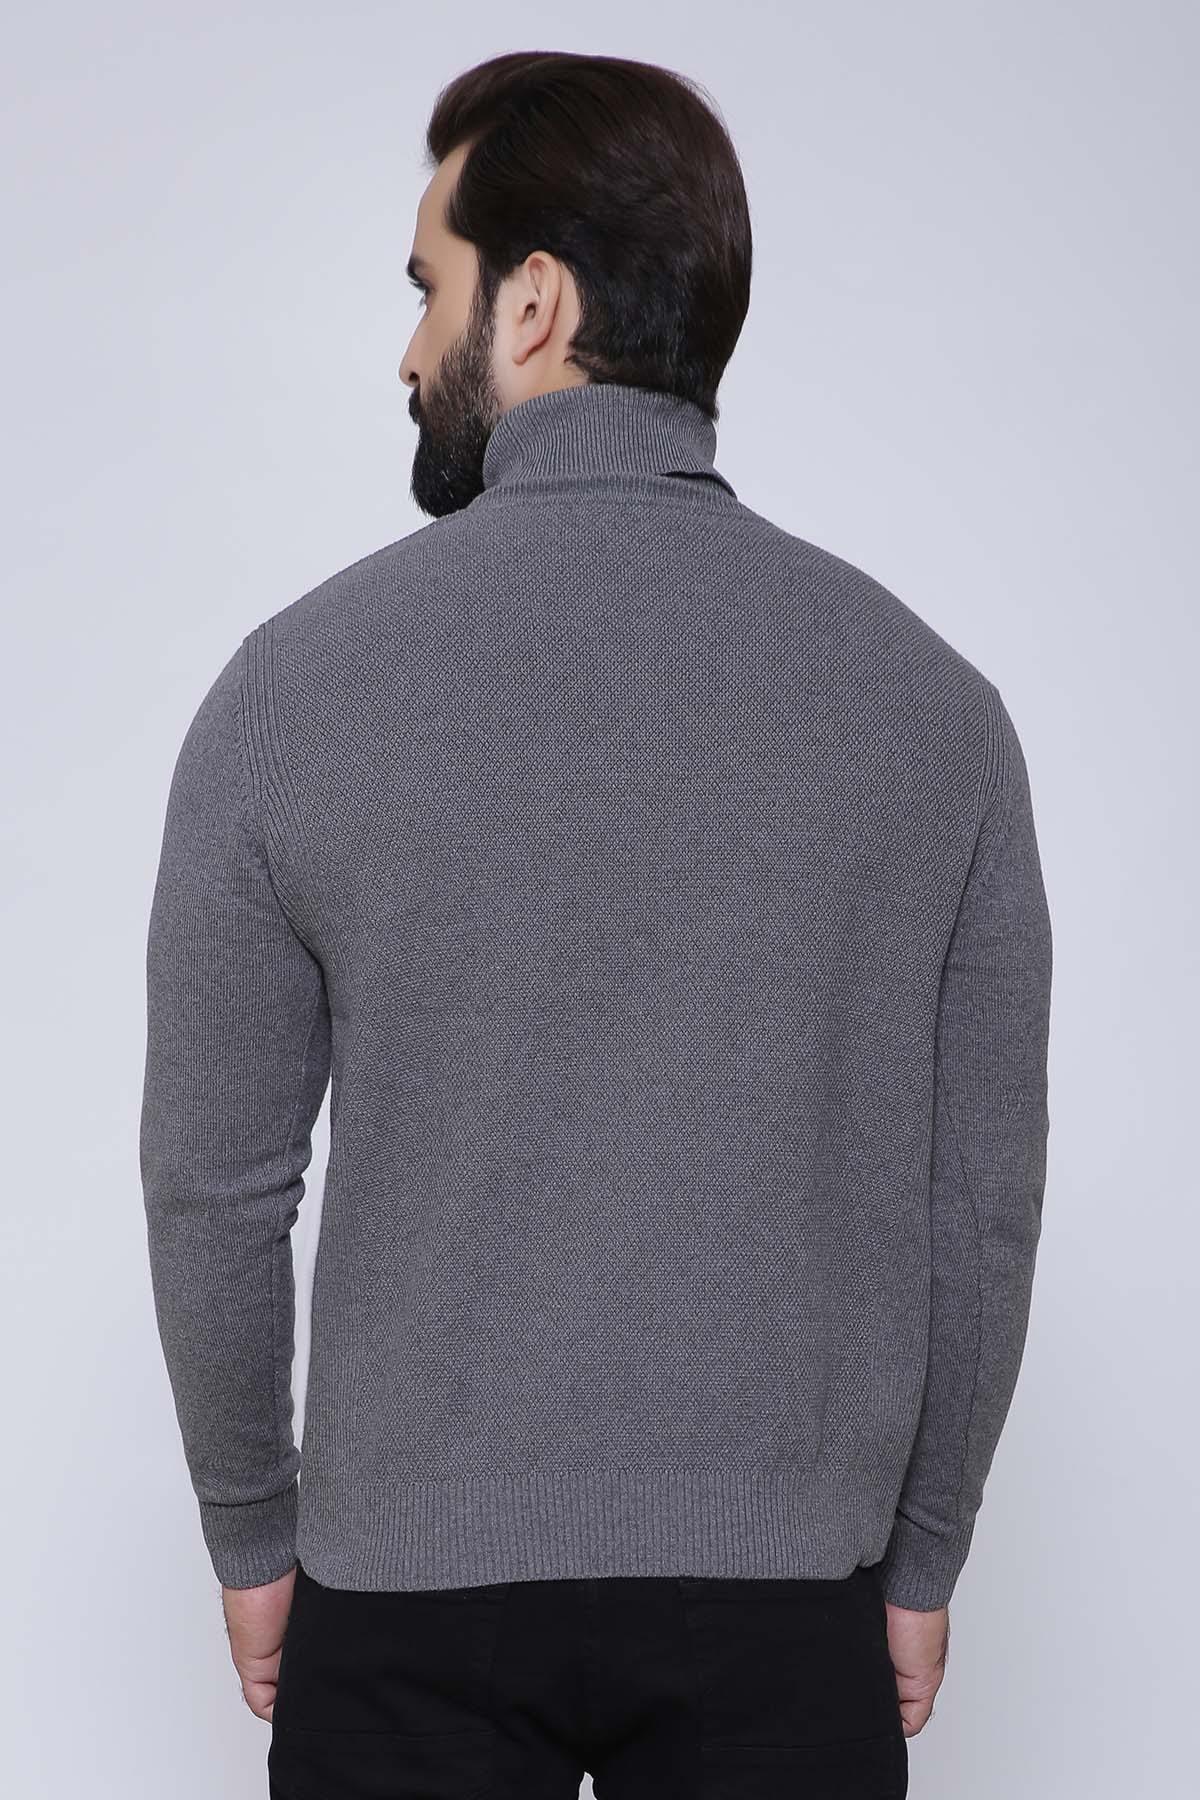 SWEATER HIGH NECK FULL SLEEVE GREY at Charcoal Clothing